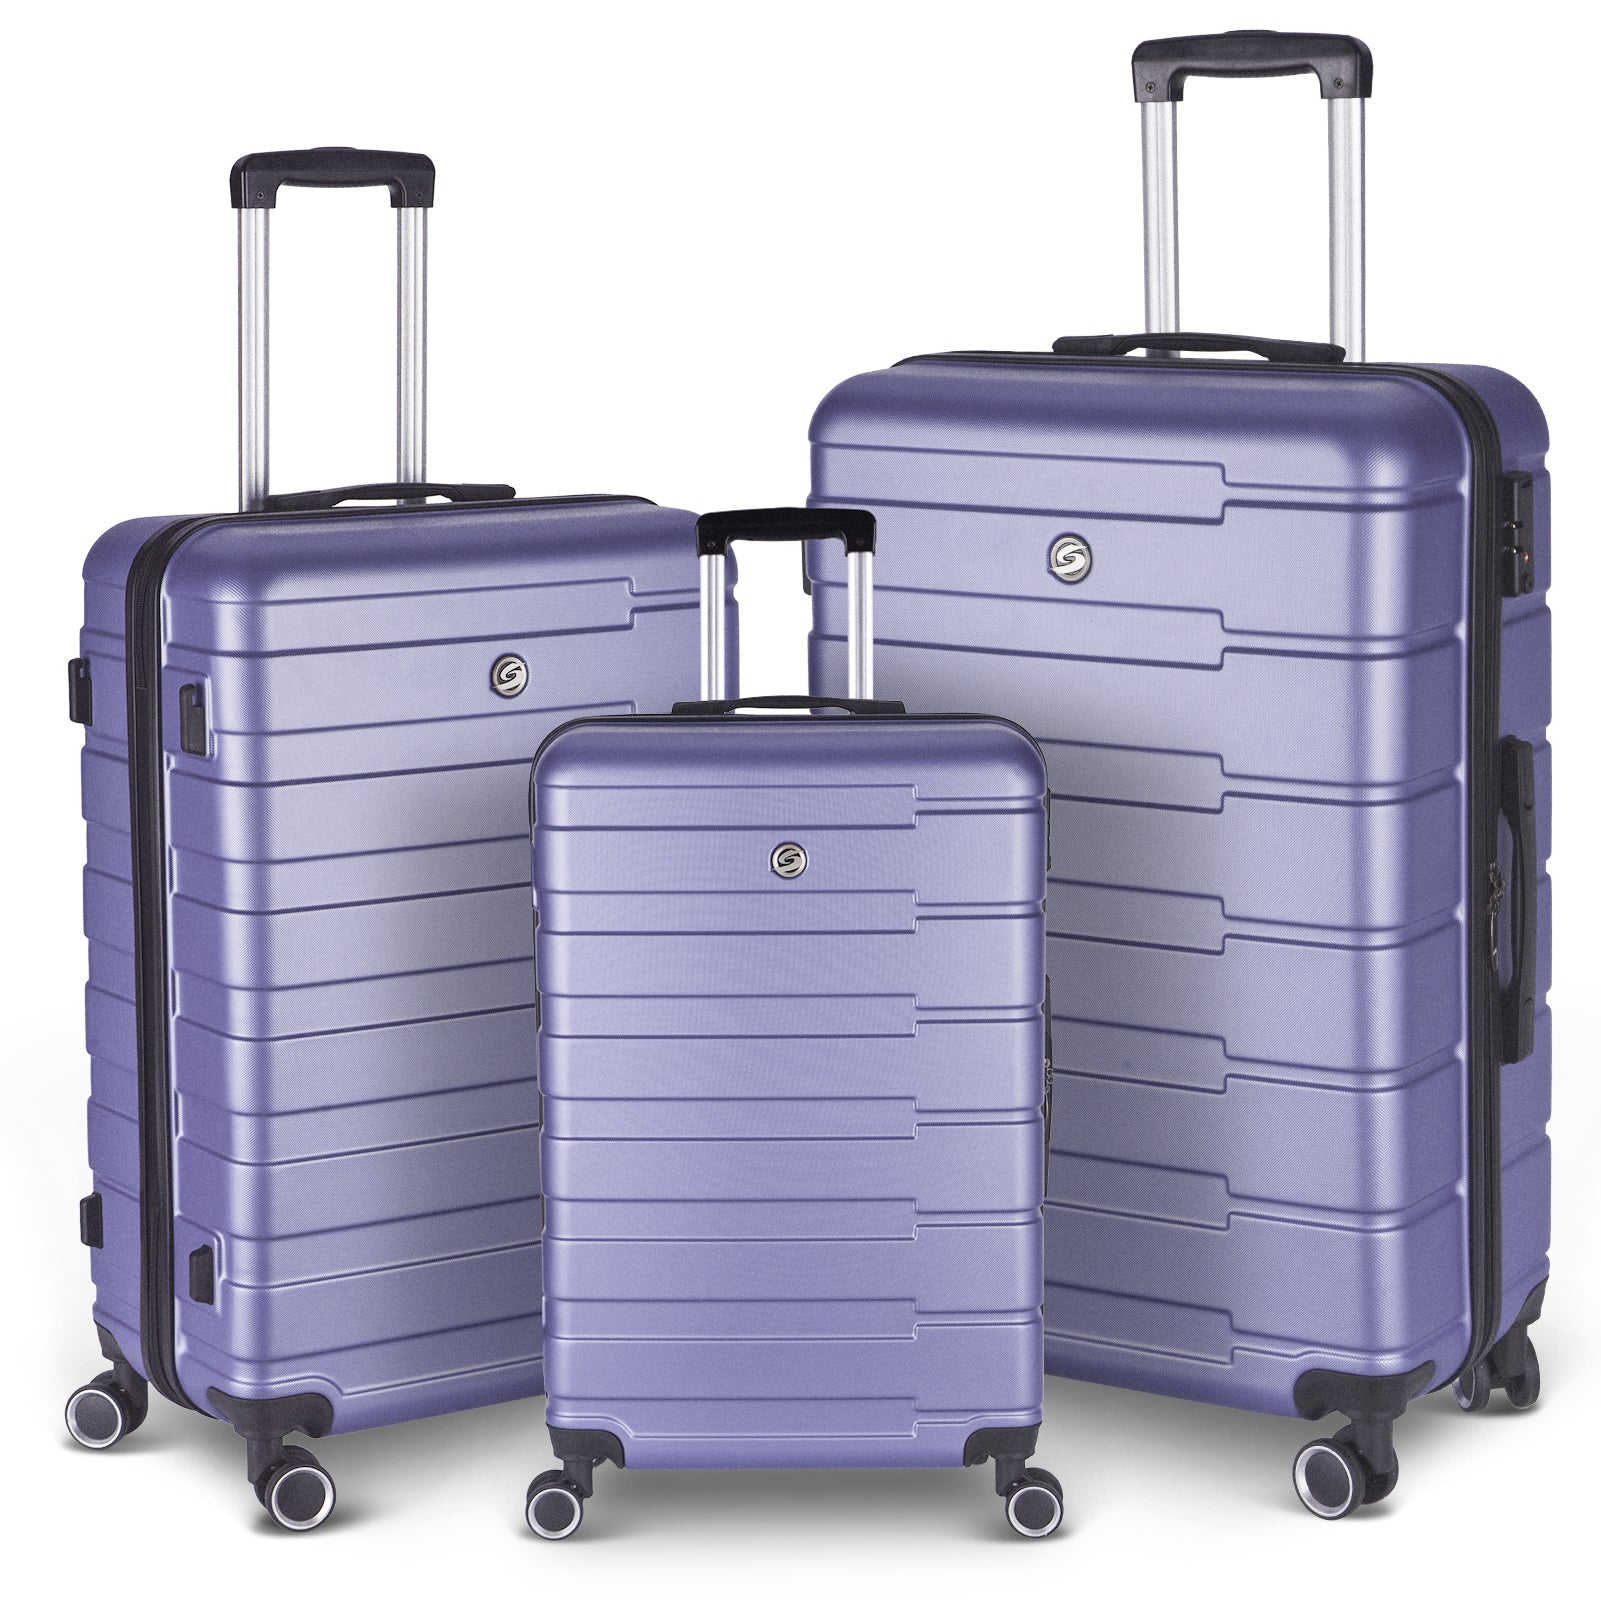 Luggage Suitcase 3 Piece Sets Hardside Carry on lavender purple-abs